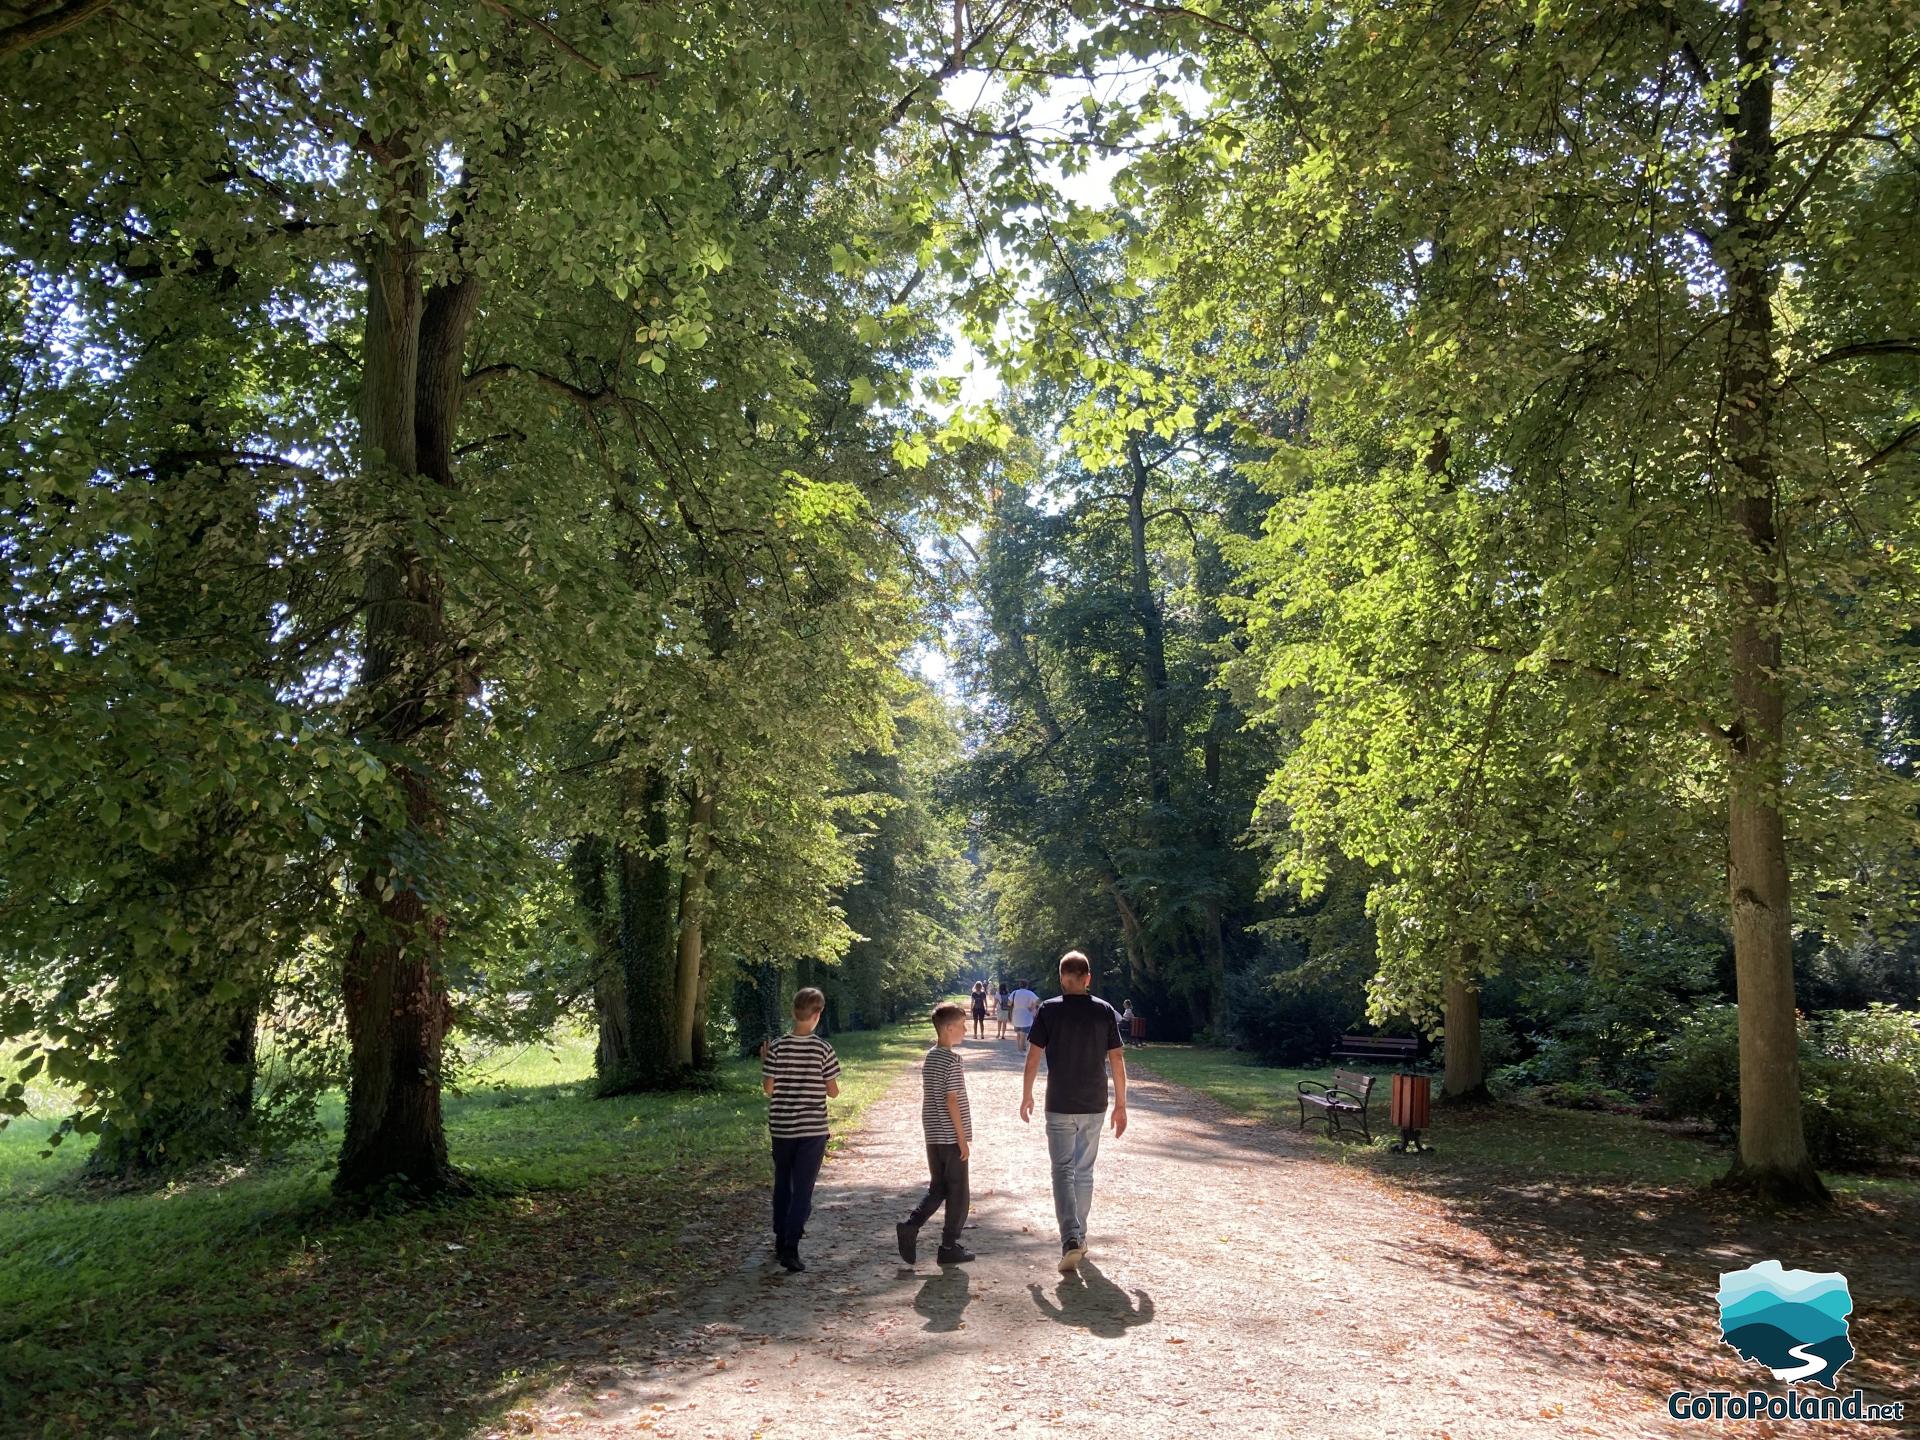 a man and two boys are walking along a forest path